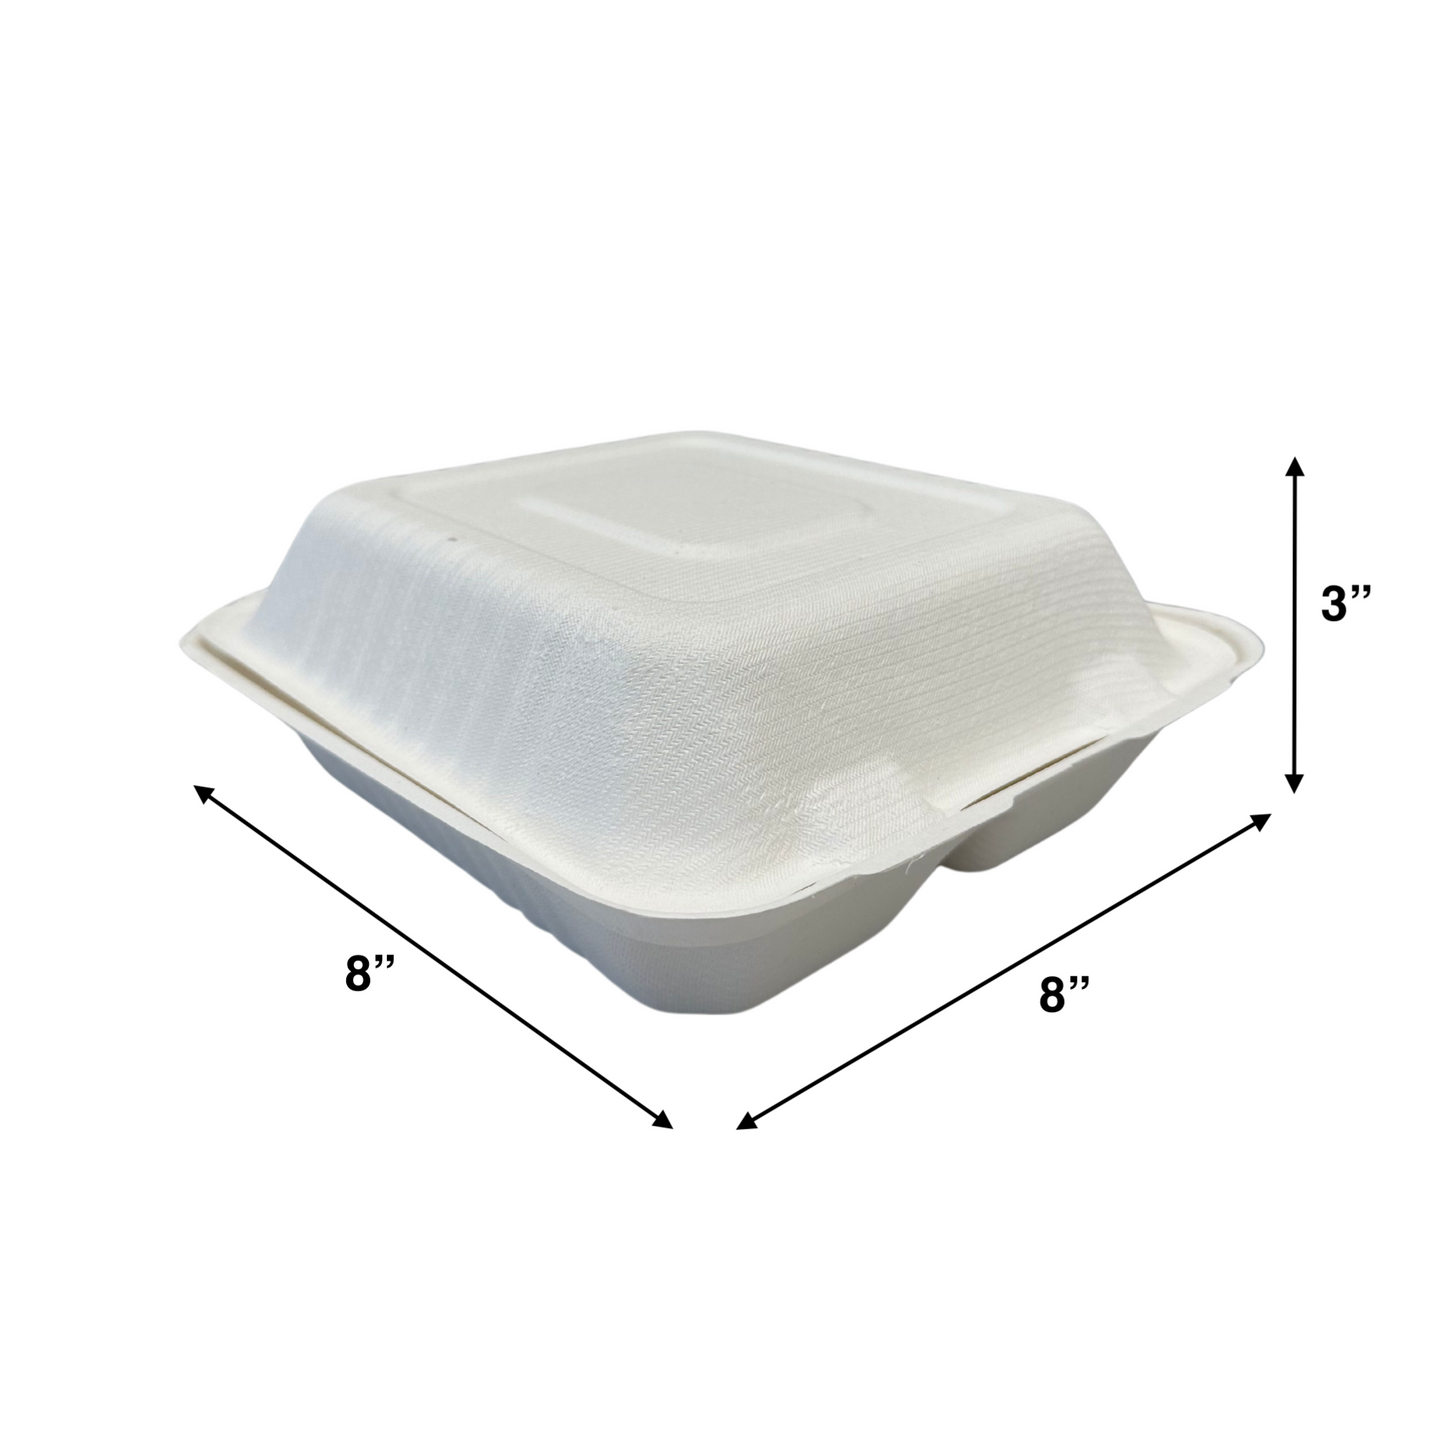 KIS-S8832 | 8x8x3 inches, 2-Compartment, Sugarcane Clamshell Food Container; $0.154/pc